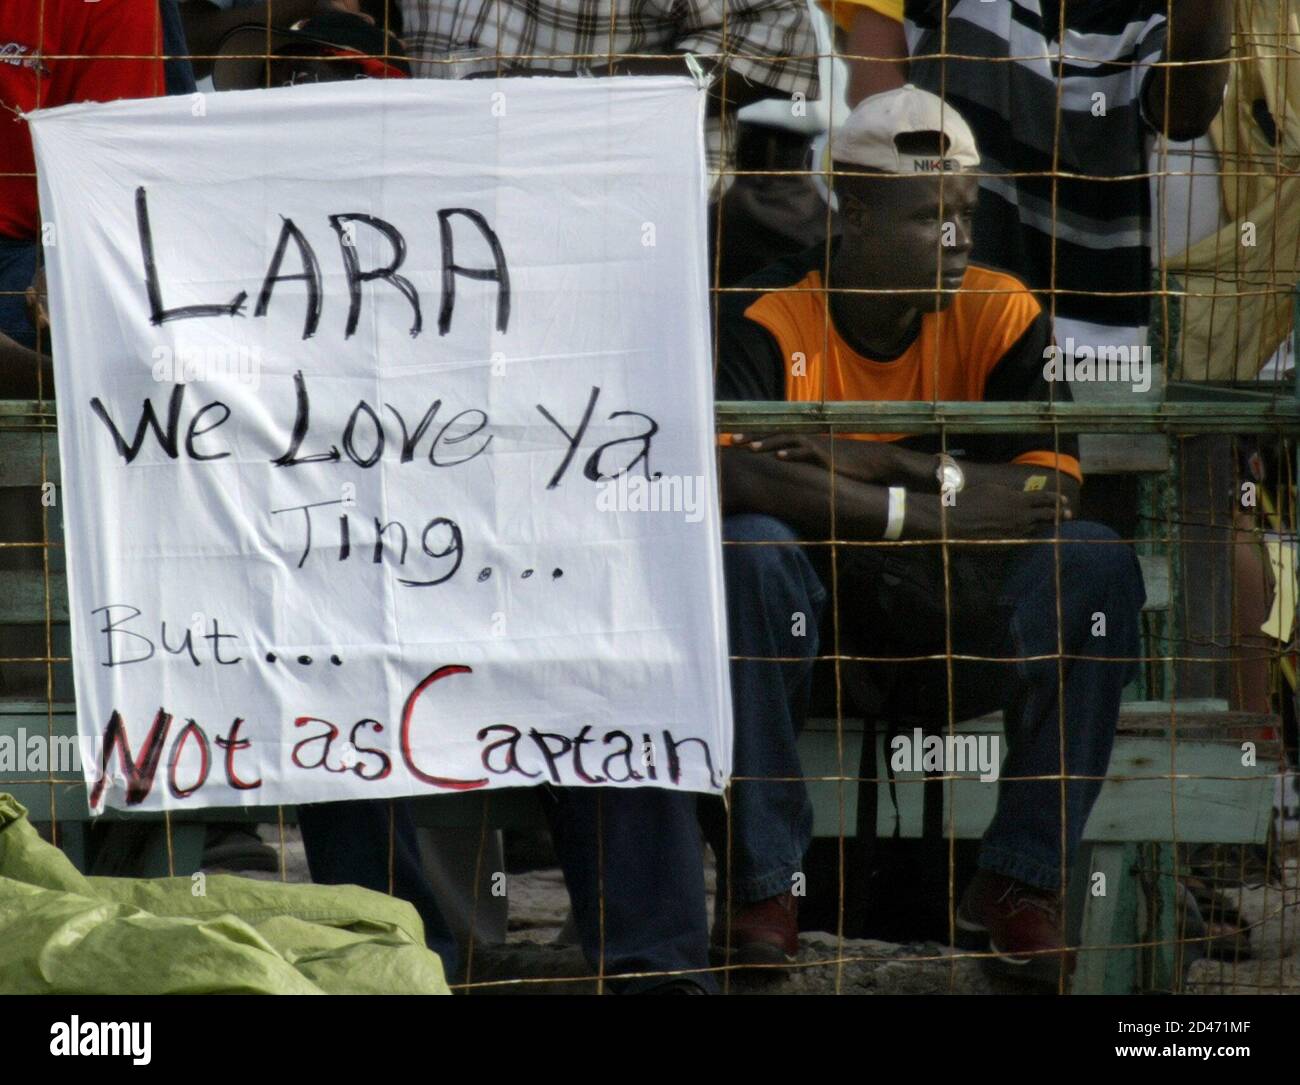 Cricket fans at the Bourda Cricket Grounds show their disapproval of West Indies captain Brian Lara and the way the team is playing, during the second day of the first test in Georgetown, Guyana, April 11, 2003. Fans have been criticizing the West Indies' performance so far. REUTERS/Andy Clark  AC/HB Stock Photo